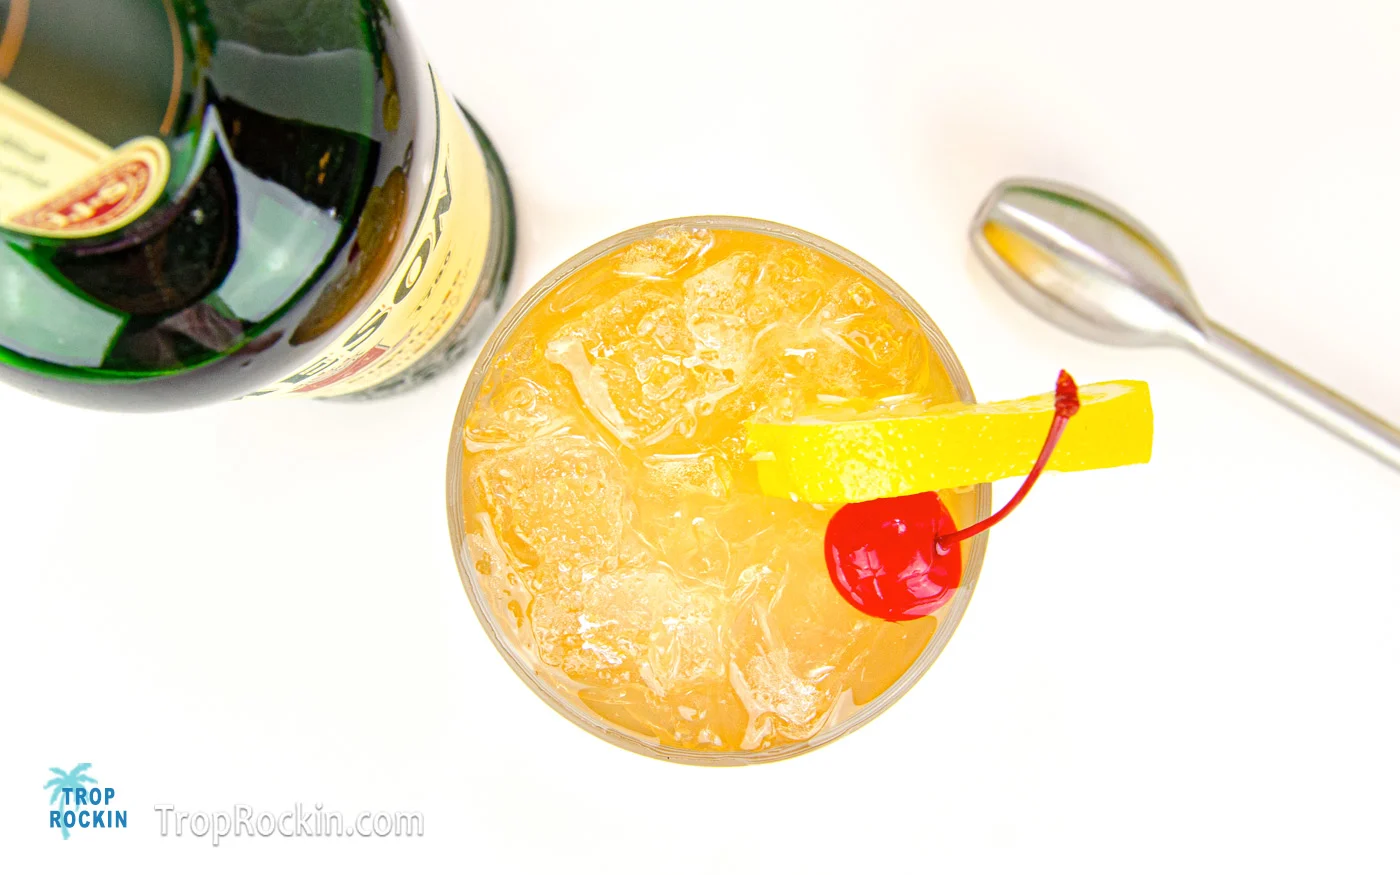 Top view of the Jameson Irish Lemonade drink with a lemon slice and cherry for garnish.